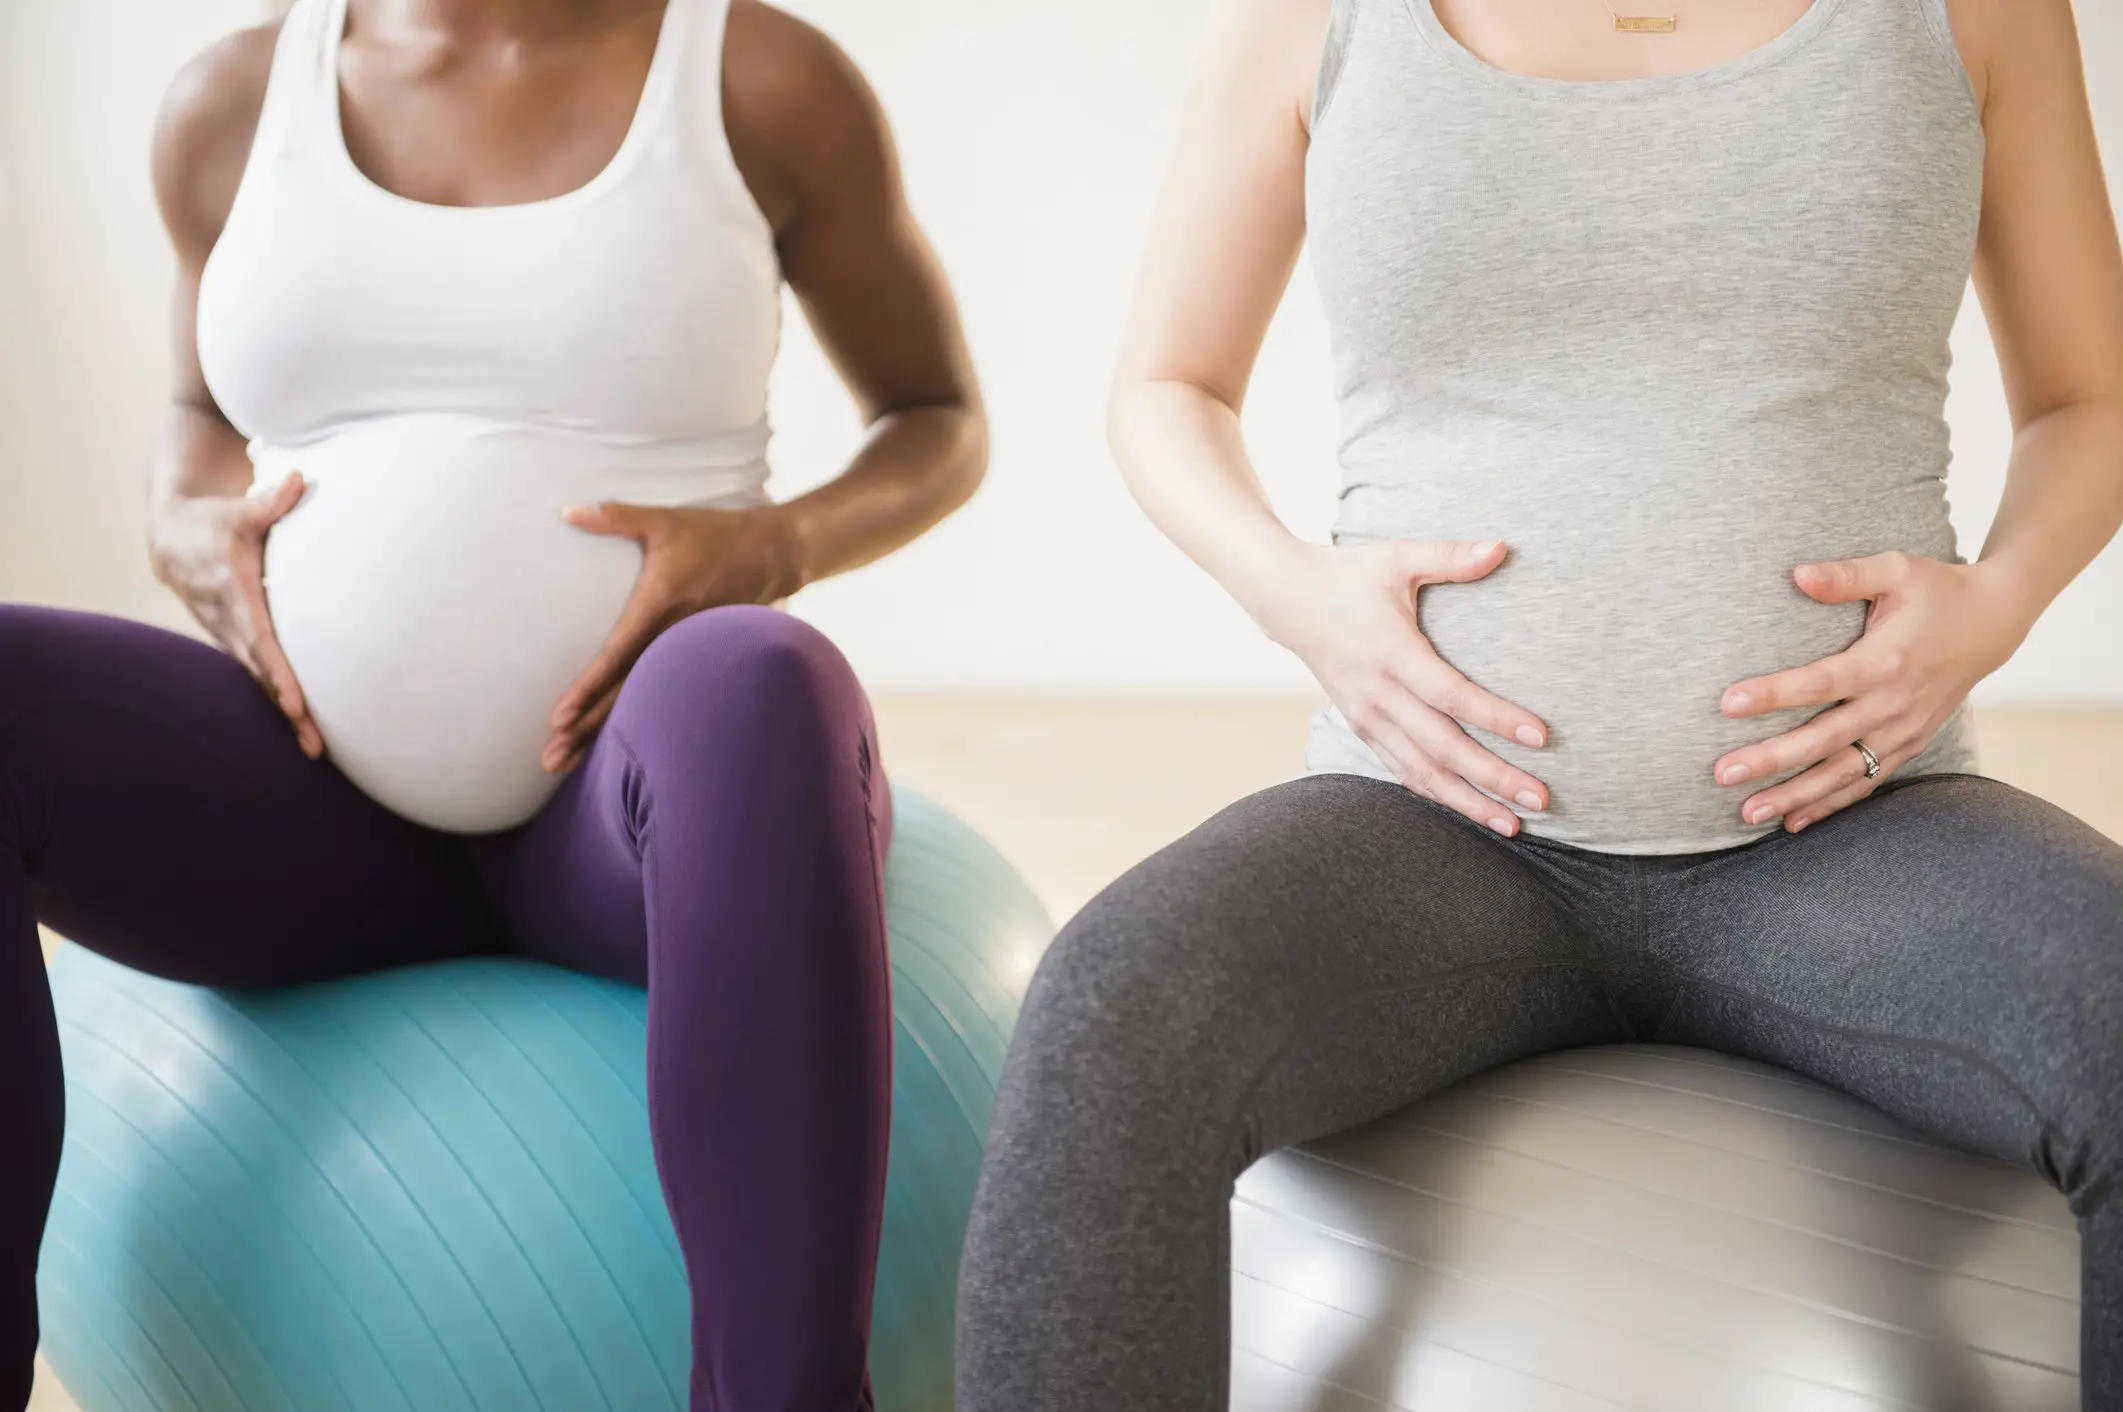 What You Should Know About Pregnancy After Weight Loss Surgery